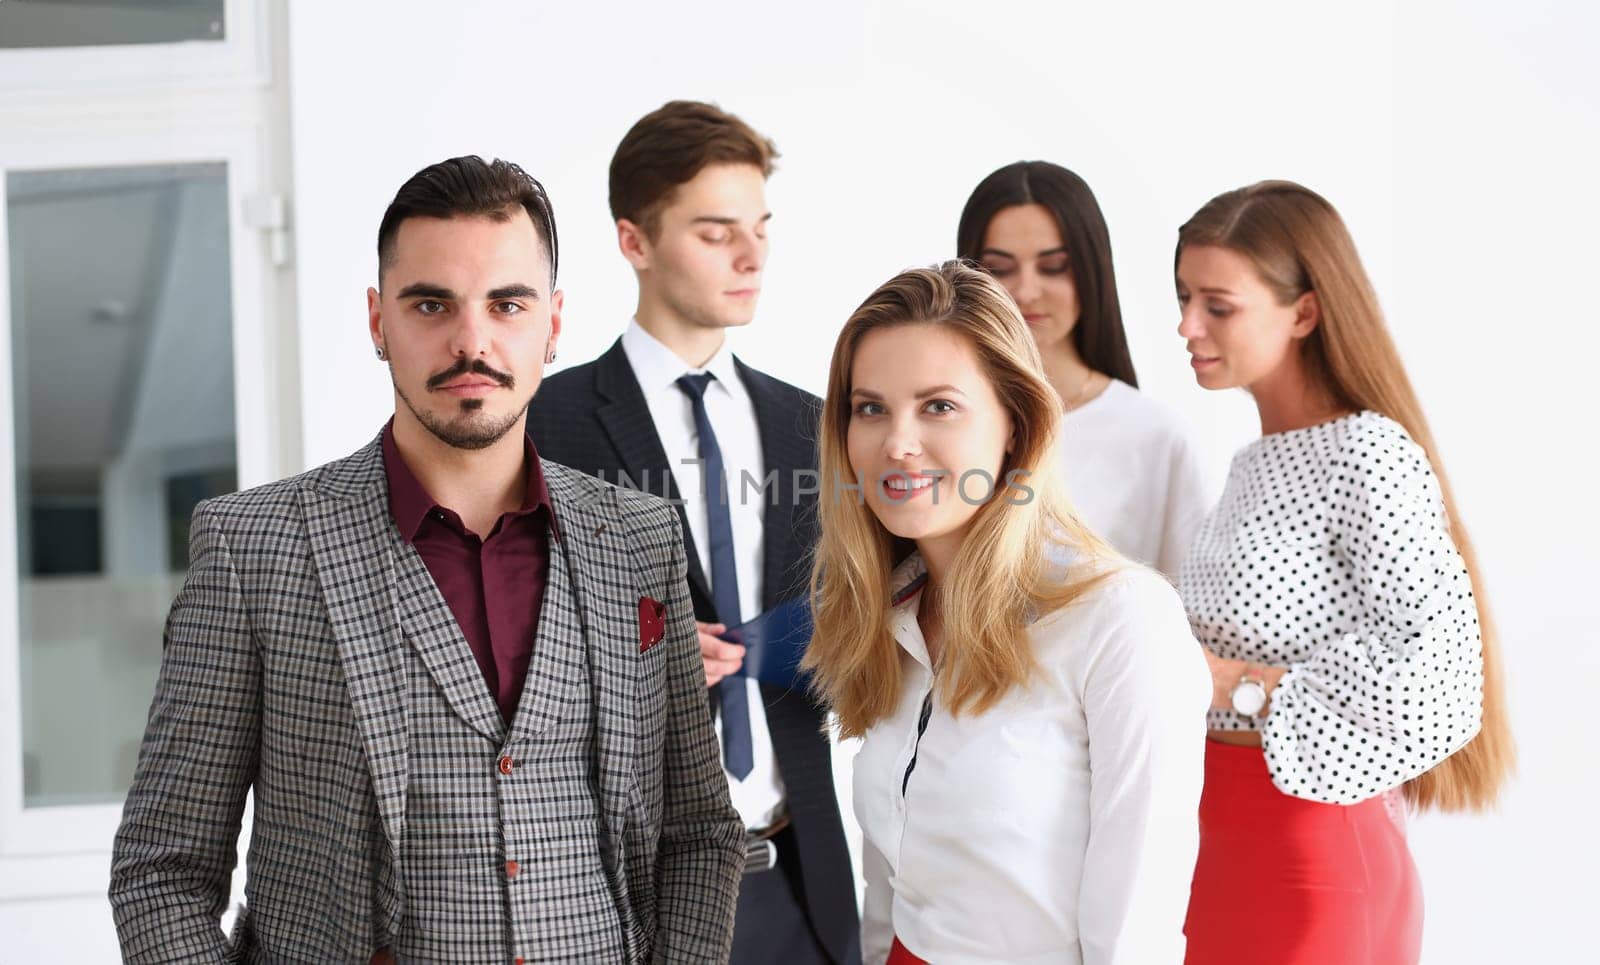 Group of smiling people stand in office looking in camera portrait. White collar power mediation solution project creative advisor participation profession train bank lawyer client visit concept